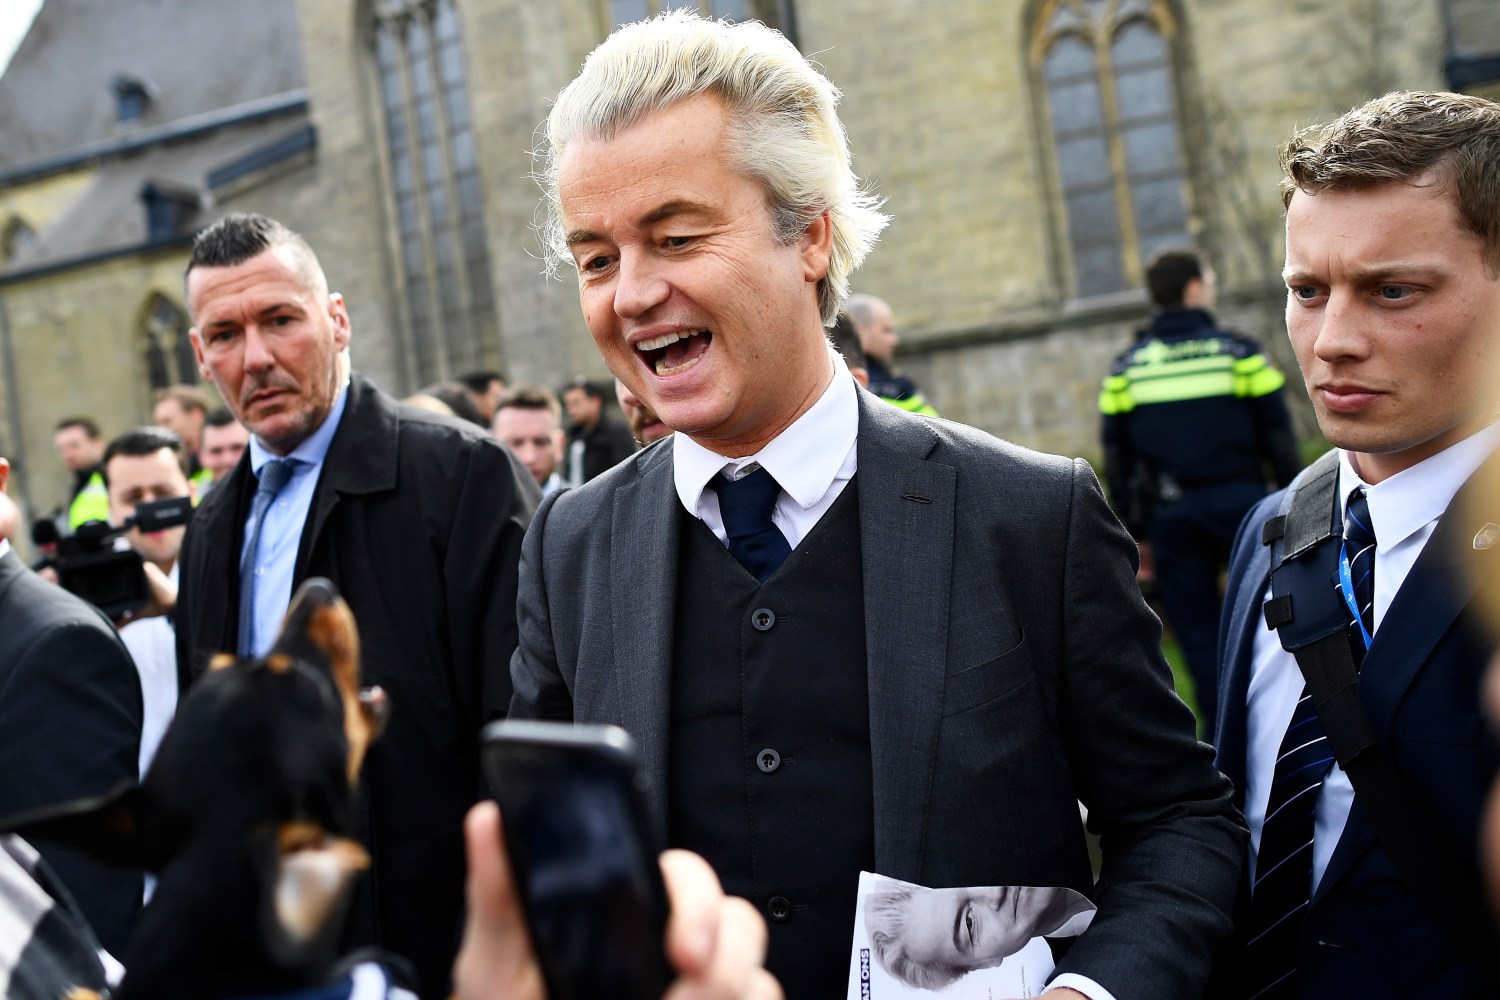 Dutch far-right politician Geert Wilders of the PVV party reacts as a dog barks at him as he campaigns in Valkenburg, Netherlands, March 11, 2017.  REUTERS/Dylan Martinez - RC1F934580E0